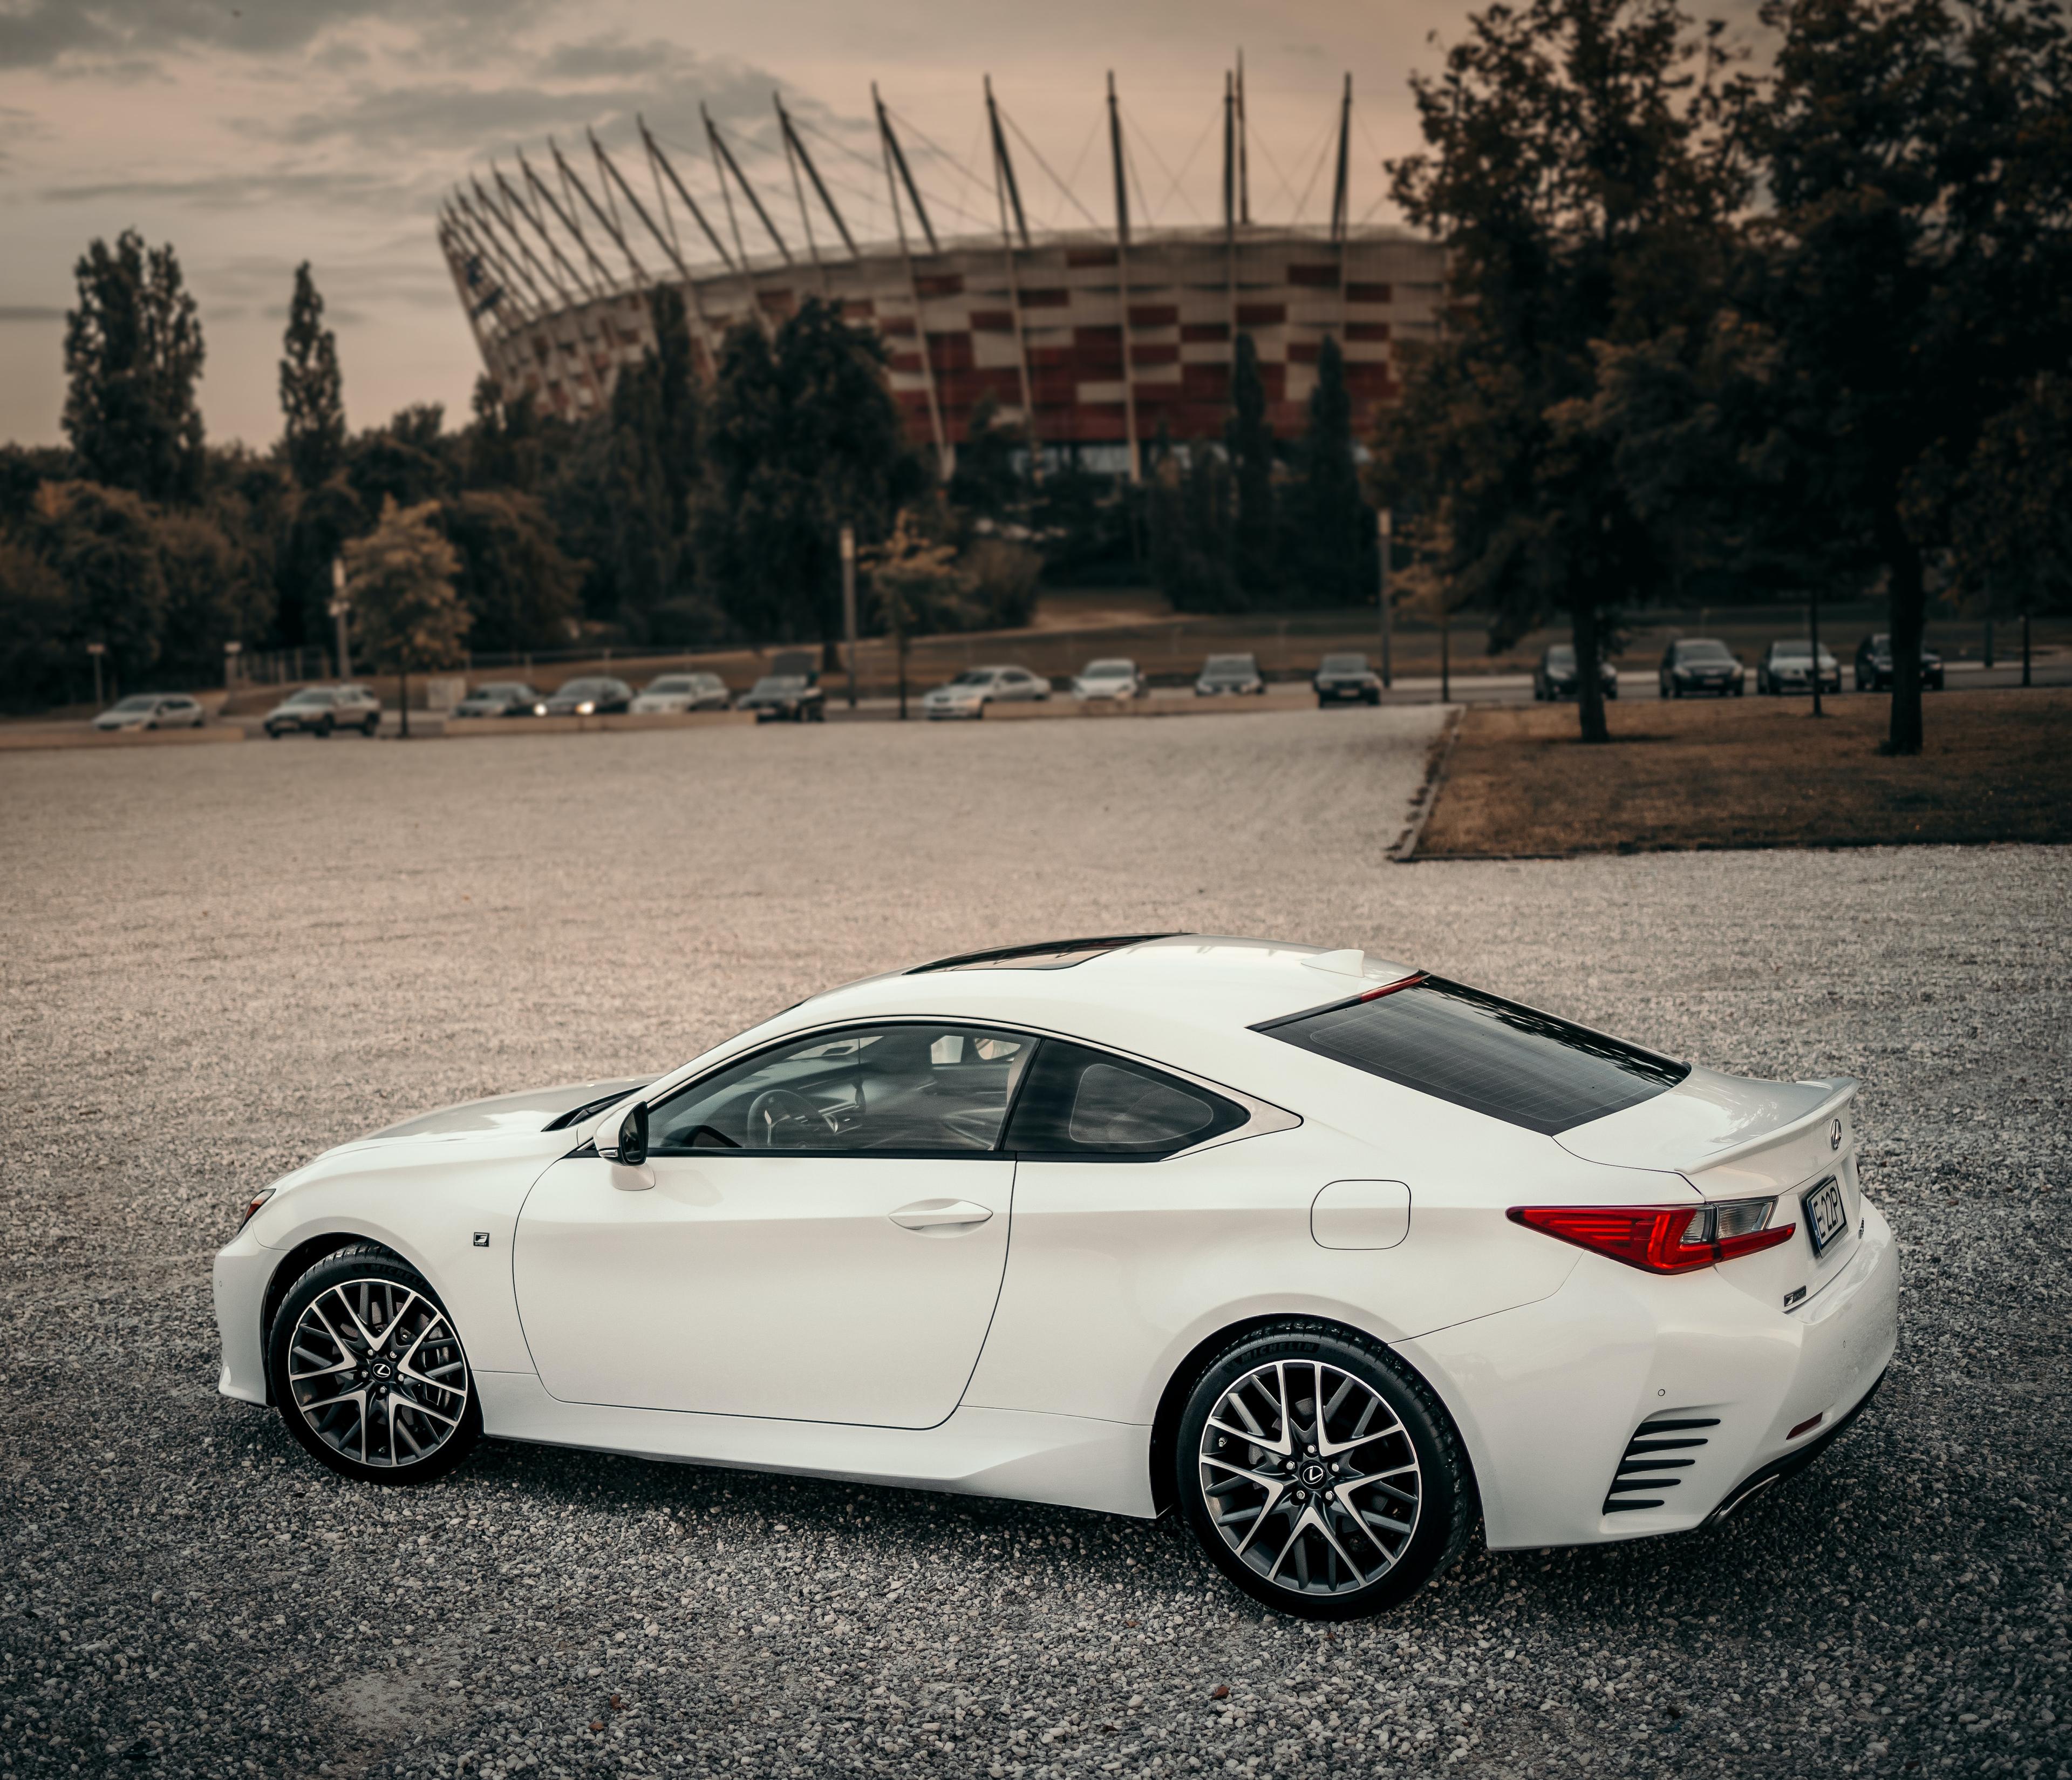 Image of a white RC Lexus, view from side and slightly above. Photo was taken in front of the Polish National Stadium in Warsaw and the stadium and more cars parked in the parking lot can be seen in the distance. 